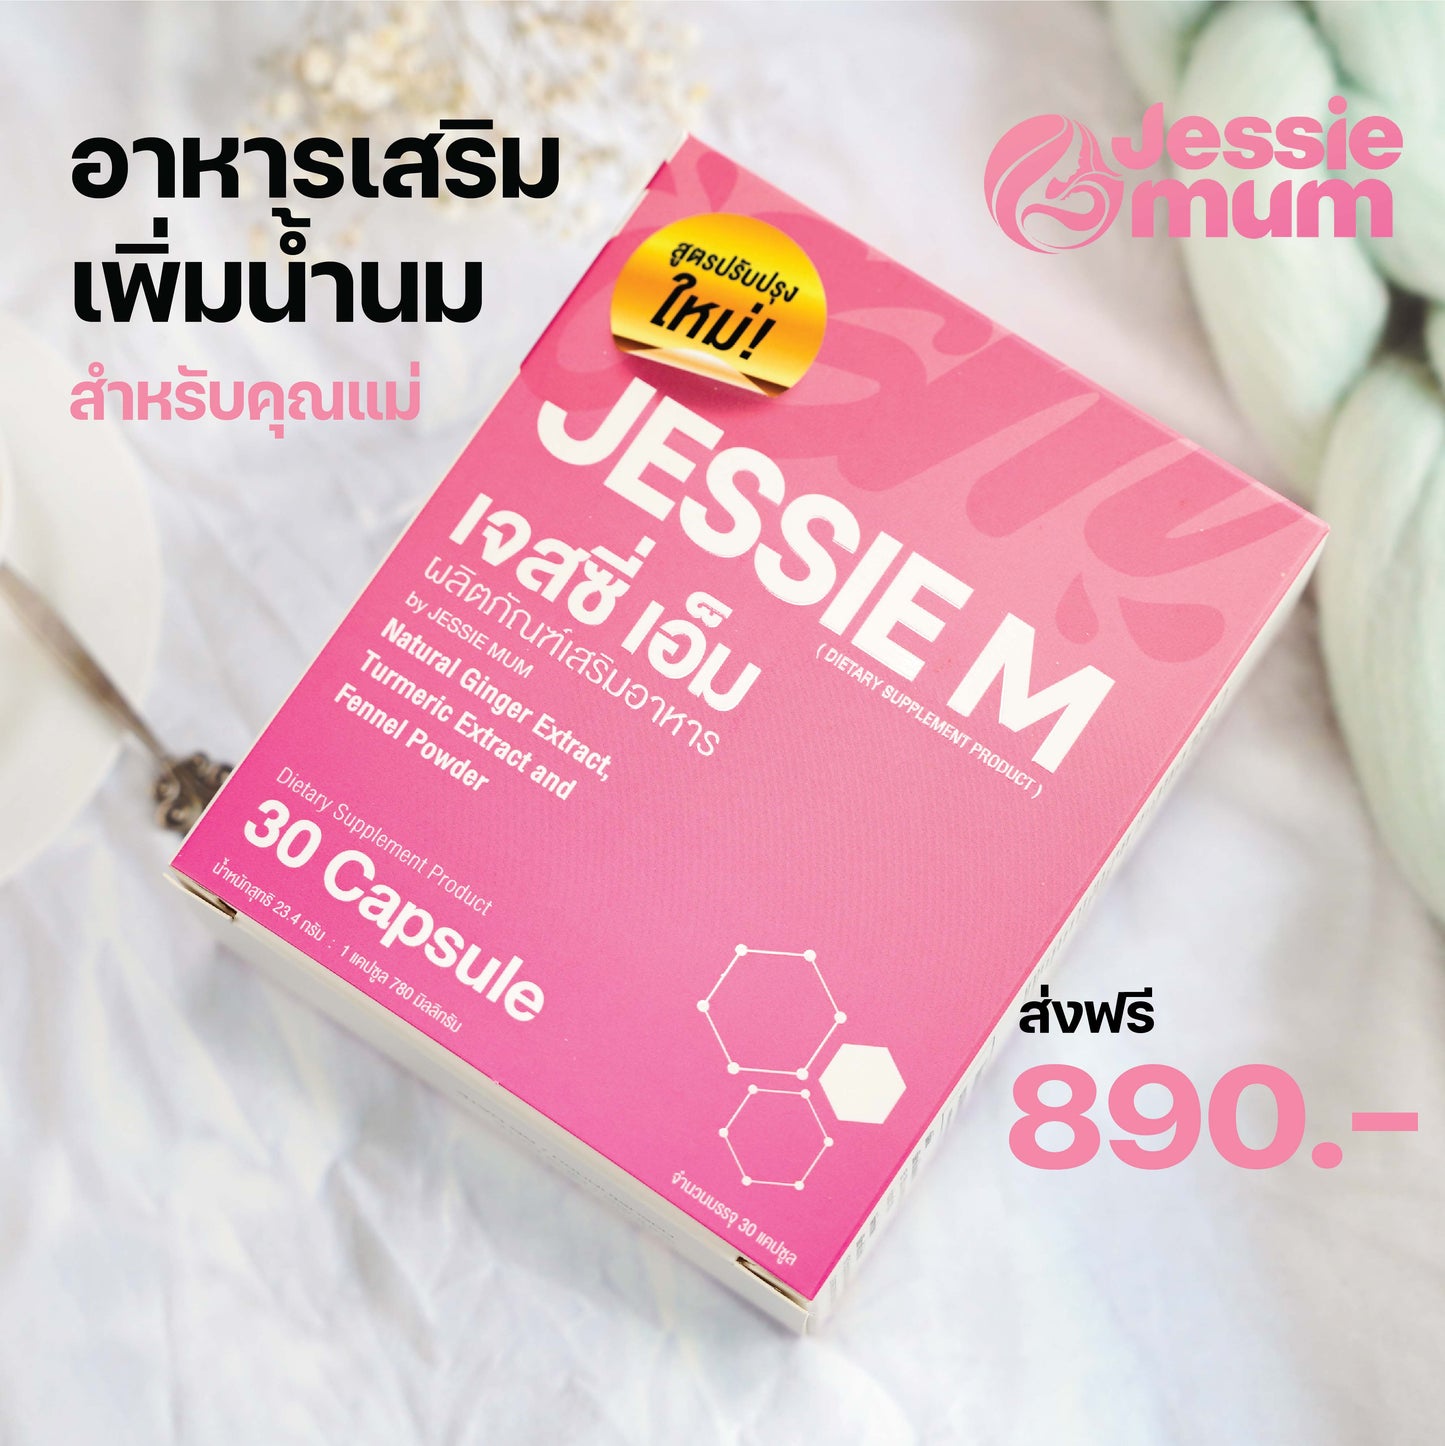 Jessie Mum Breastfeeding Dietary Supplement from 100% Natural Ingredients, Effectively Helps to Increase Breast Milk, Contains 30 Capsules / Packet